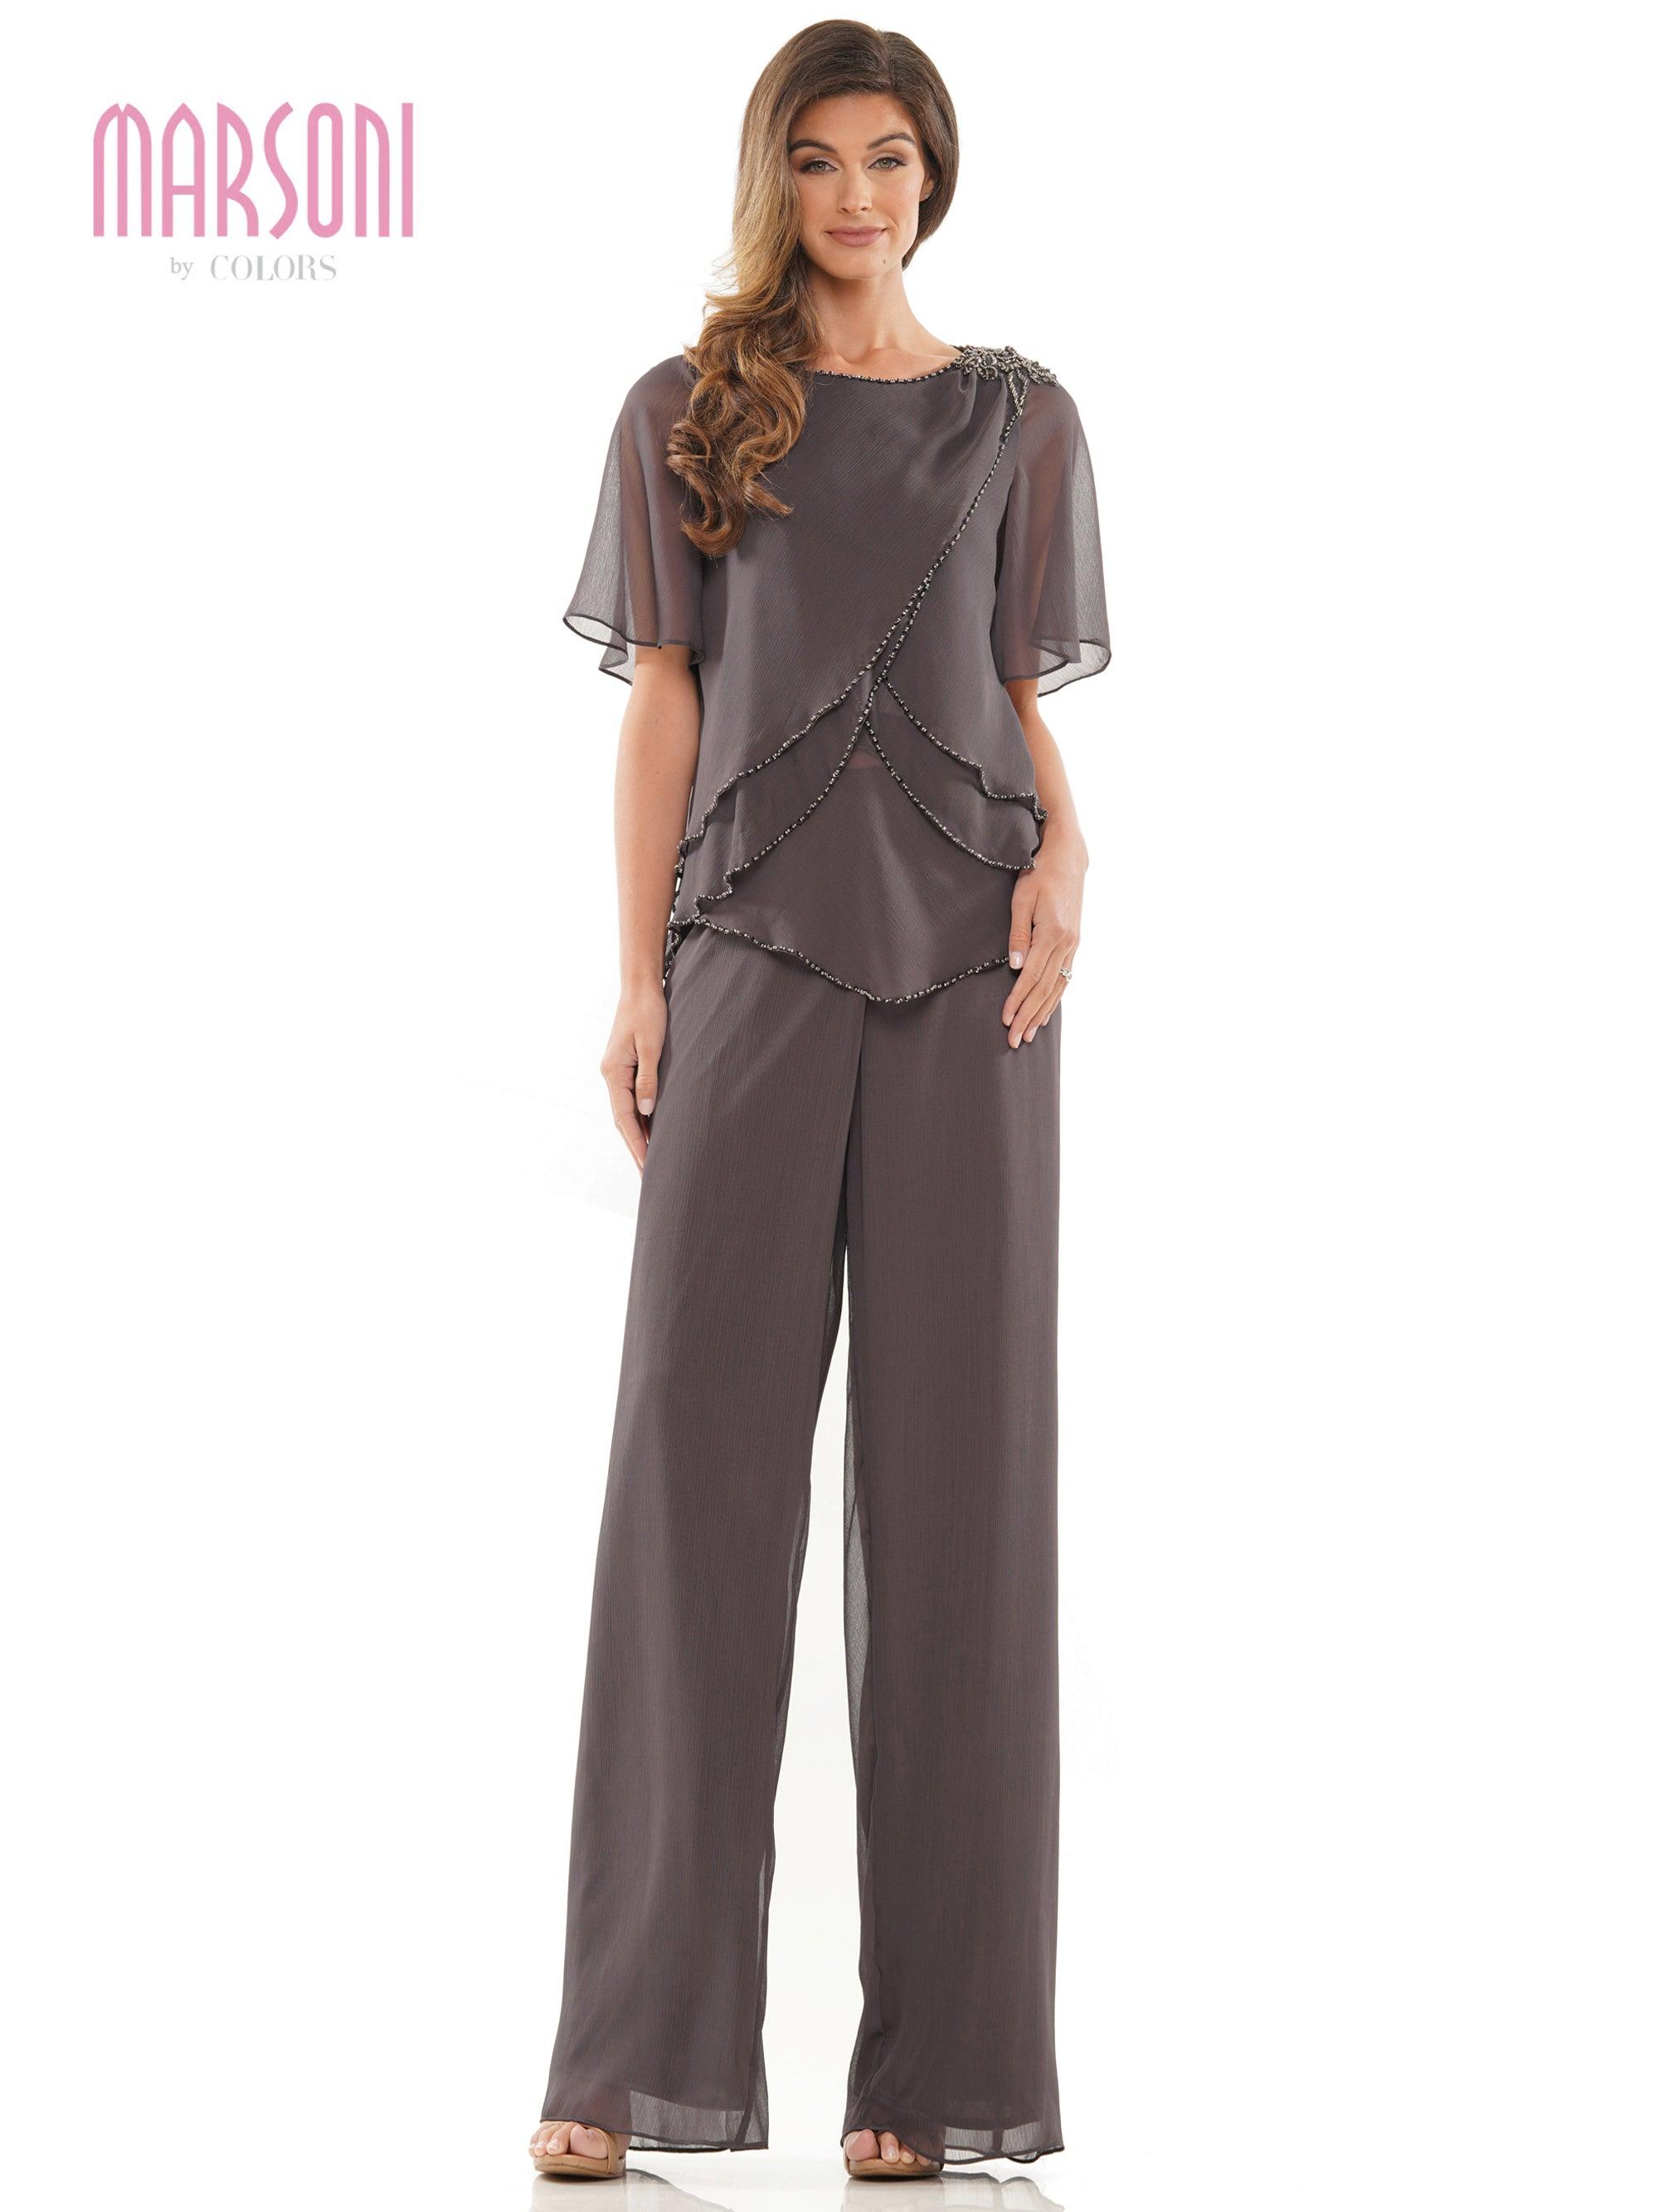 Charcoal Marsoni Formal Mother of the Bride Pant Suit M321 for $327.99, –  The Dress Outlet